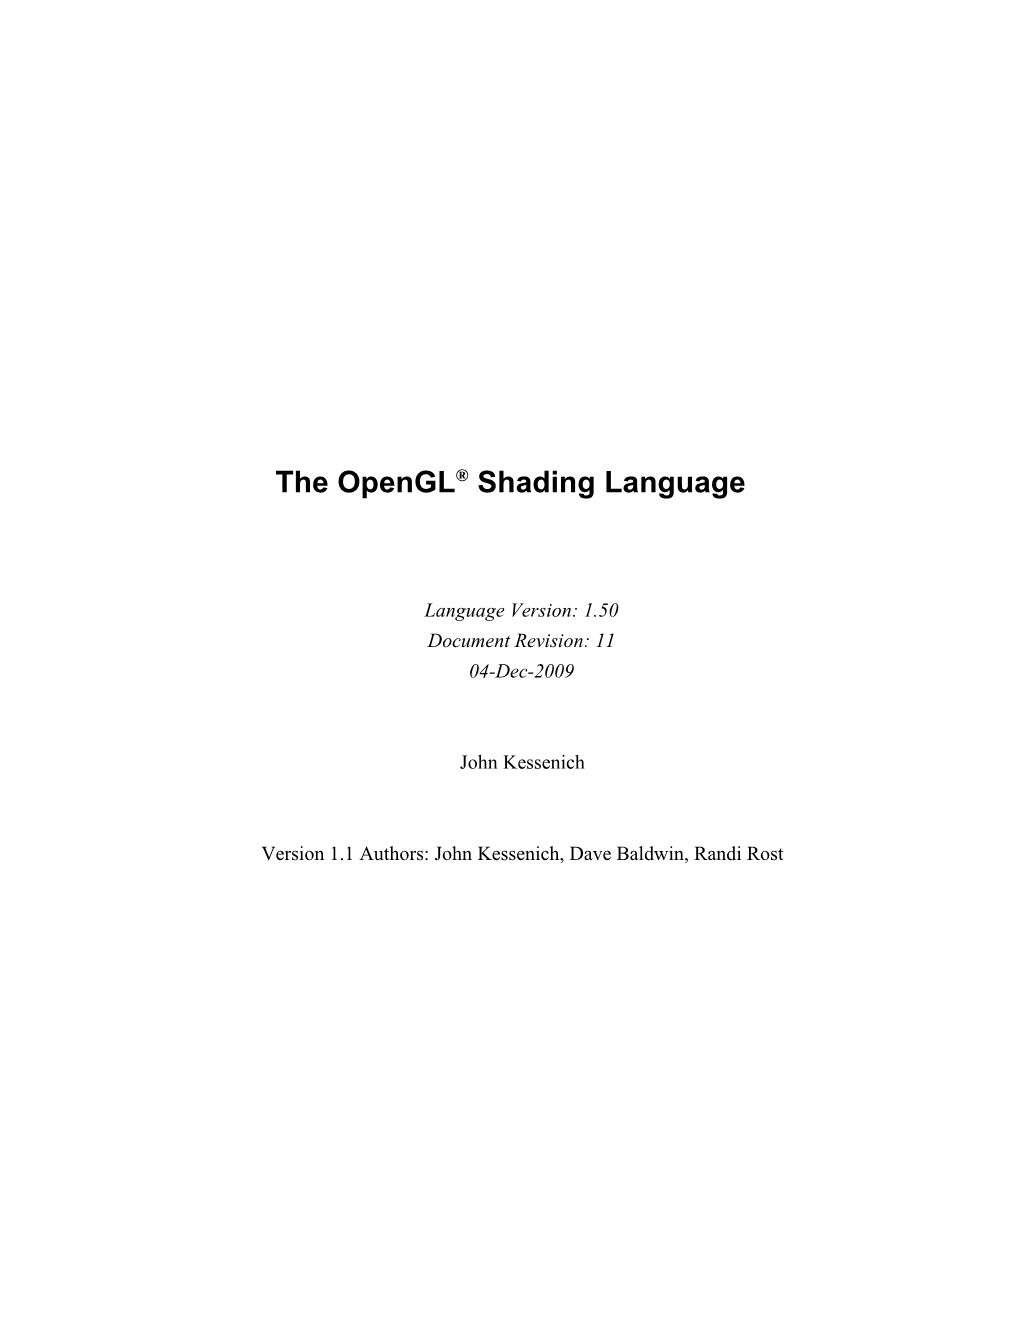 The Opengl Shading Language: a Specification (Version 1.50)